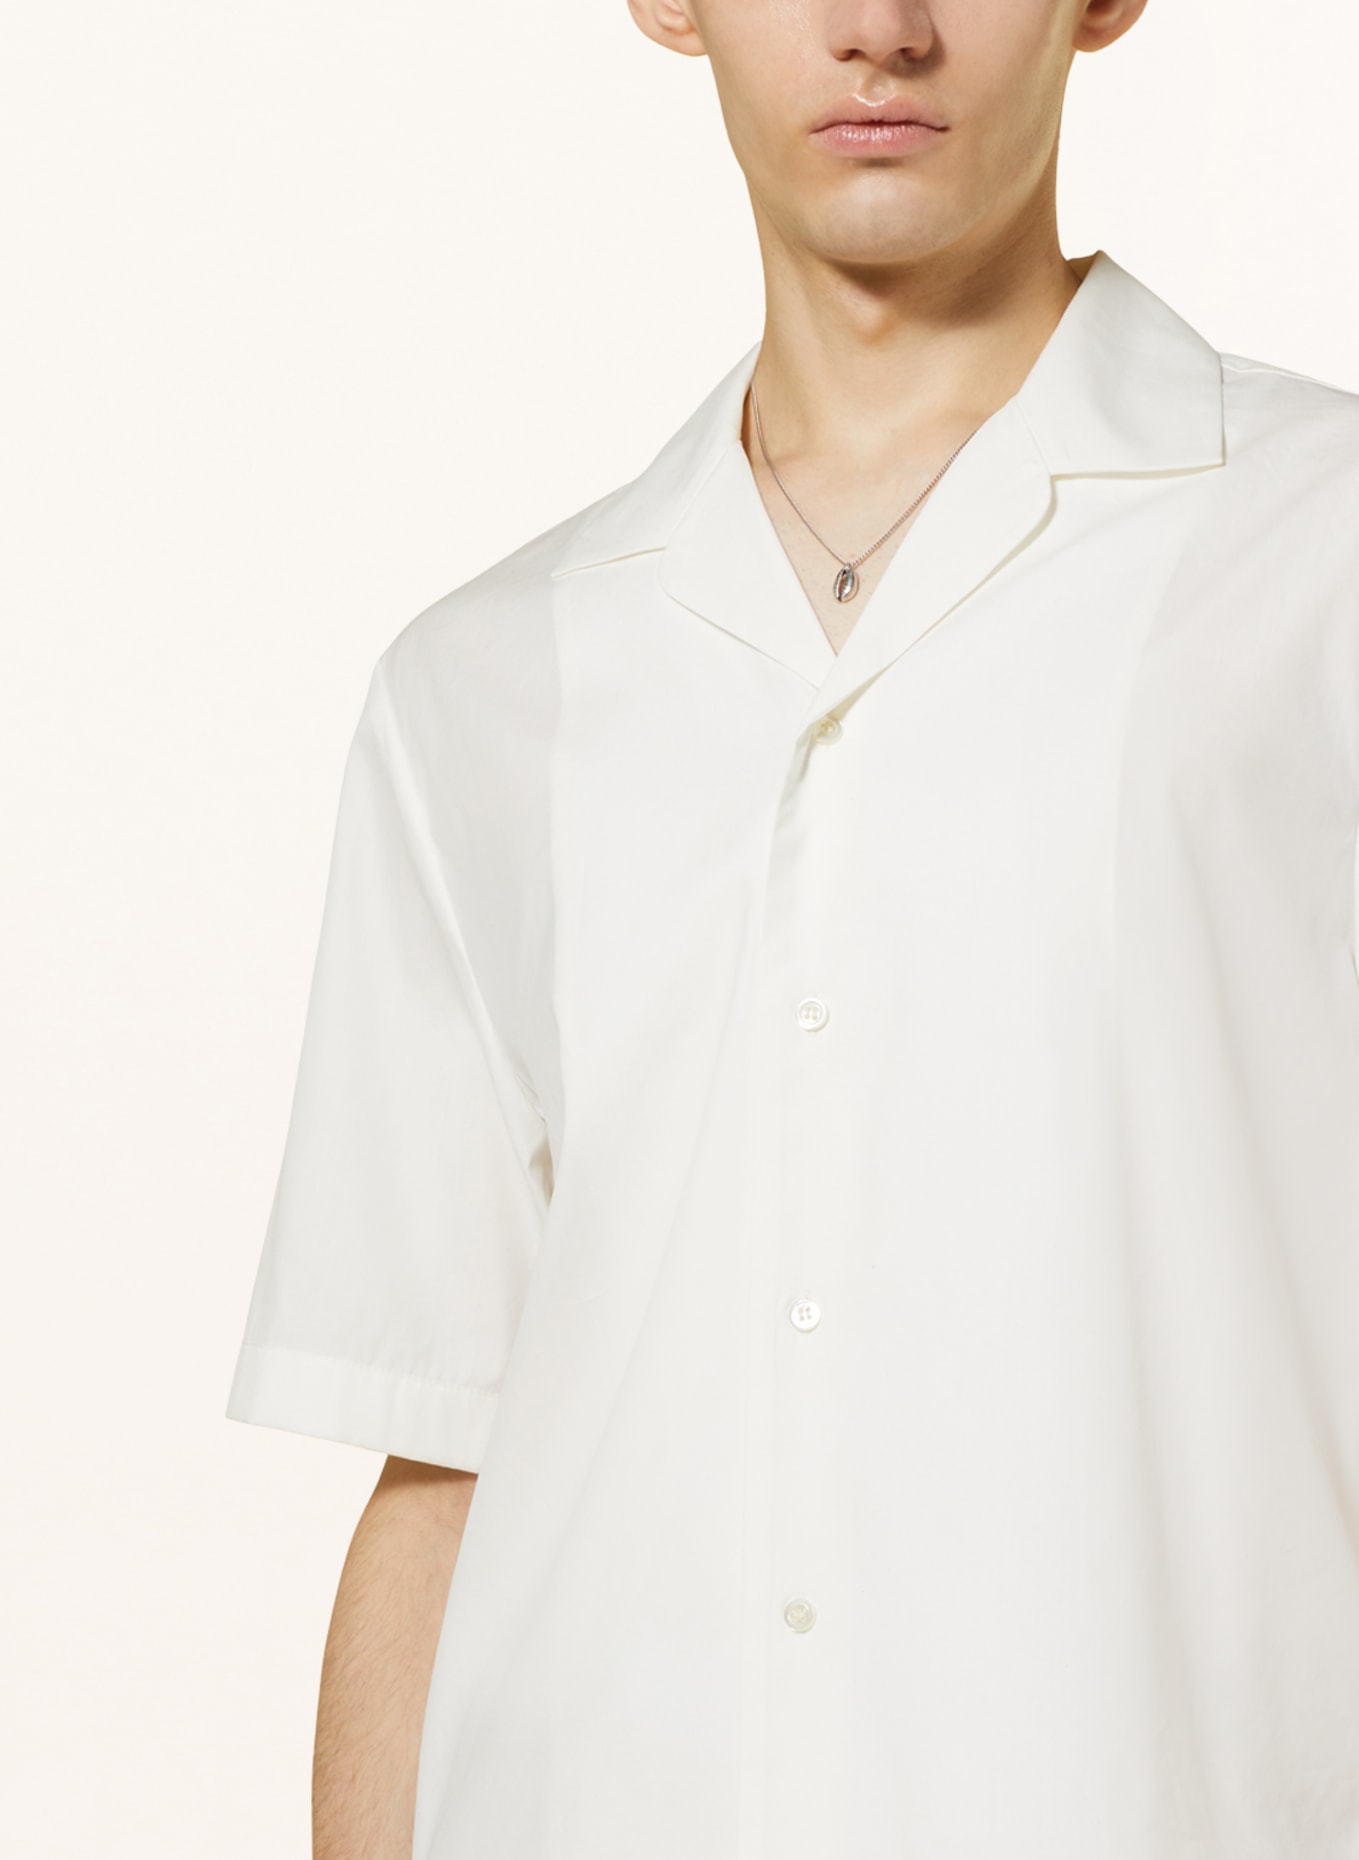 COS Resort shirt relaxed fit, Color: WHITE (Image 4)